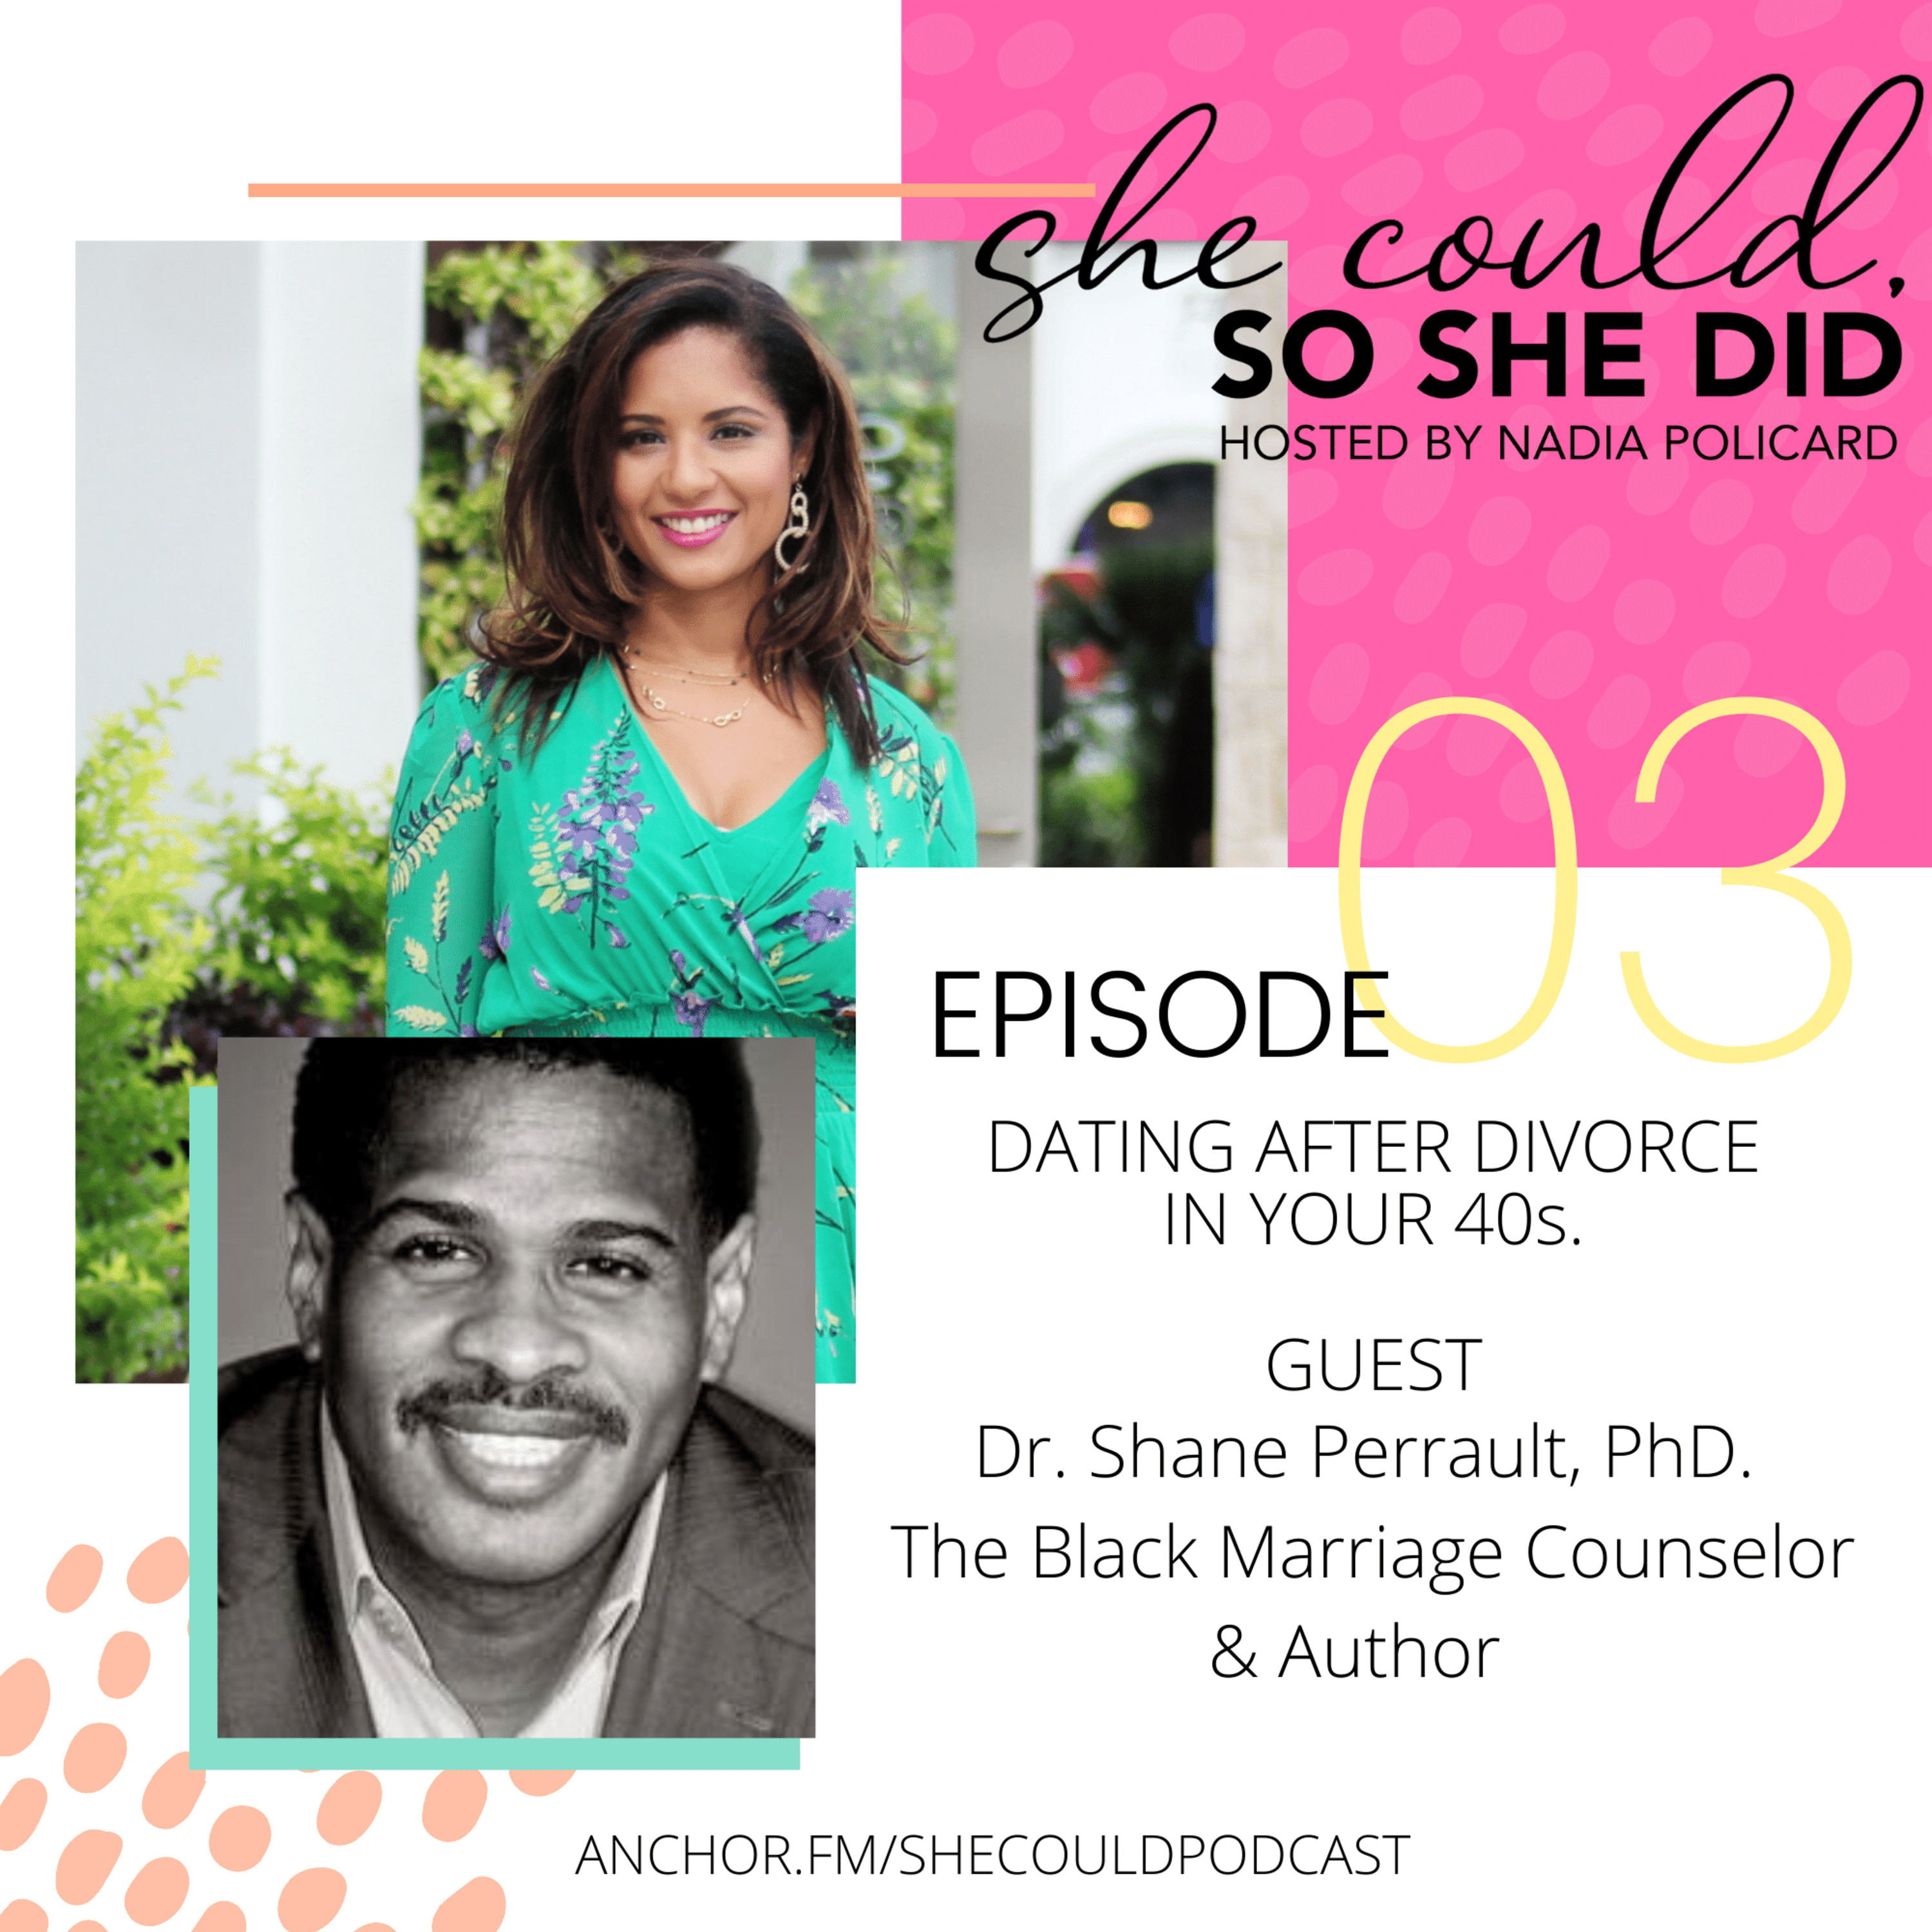 Episode 3: How to Choose the Right Man: Three Key Criteria From a Marriage Counselor and Author